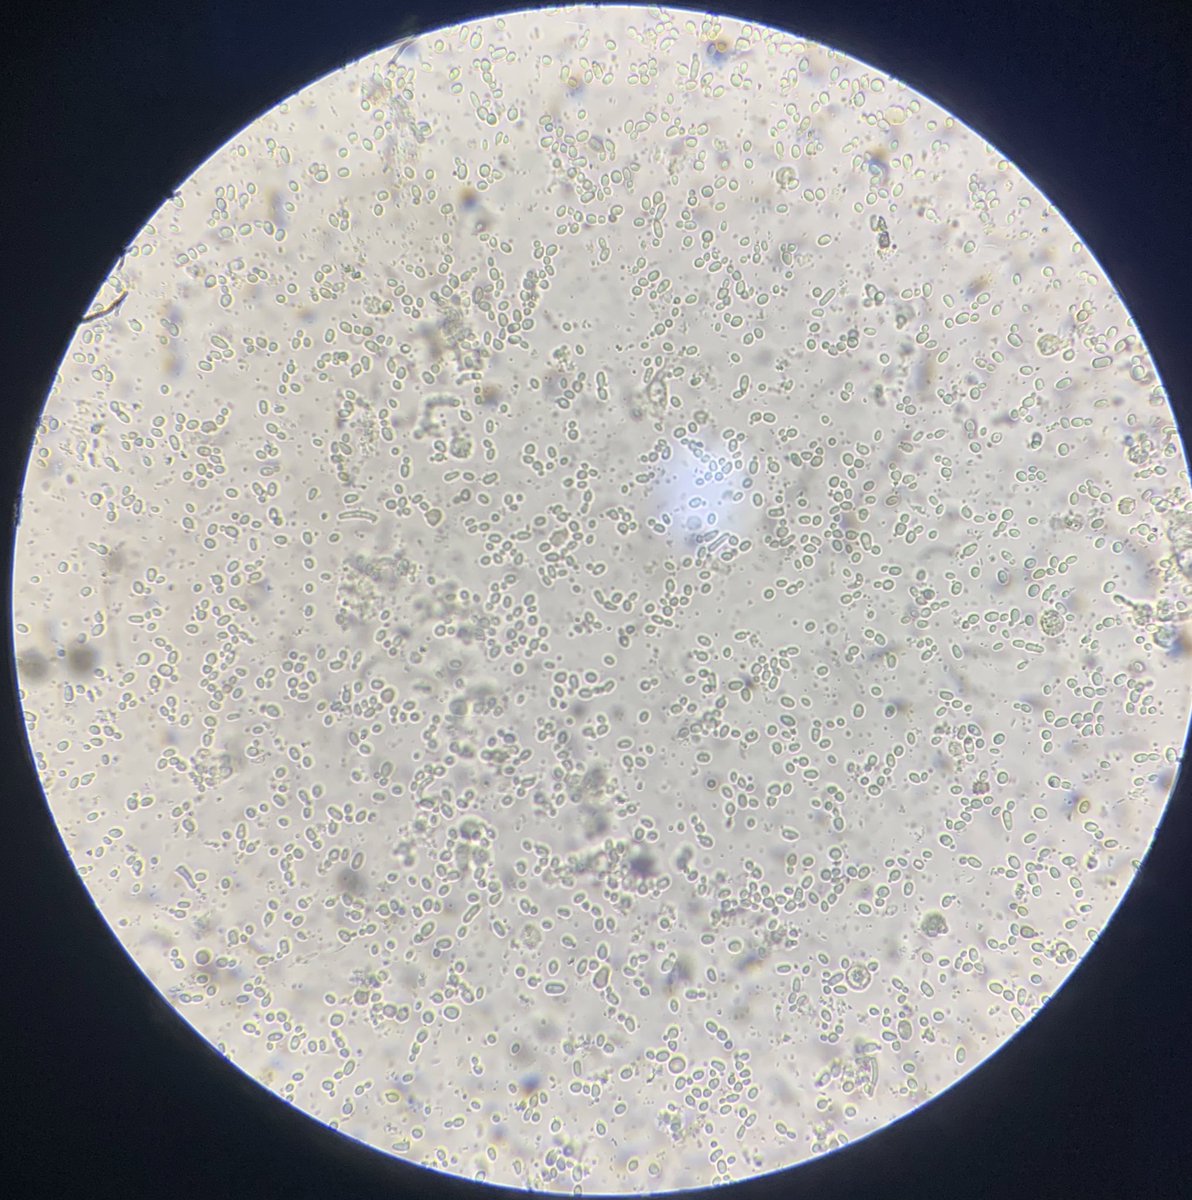 The yeast cells in this Urine Microscopy sha!